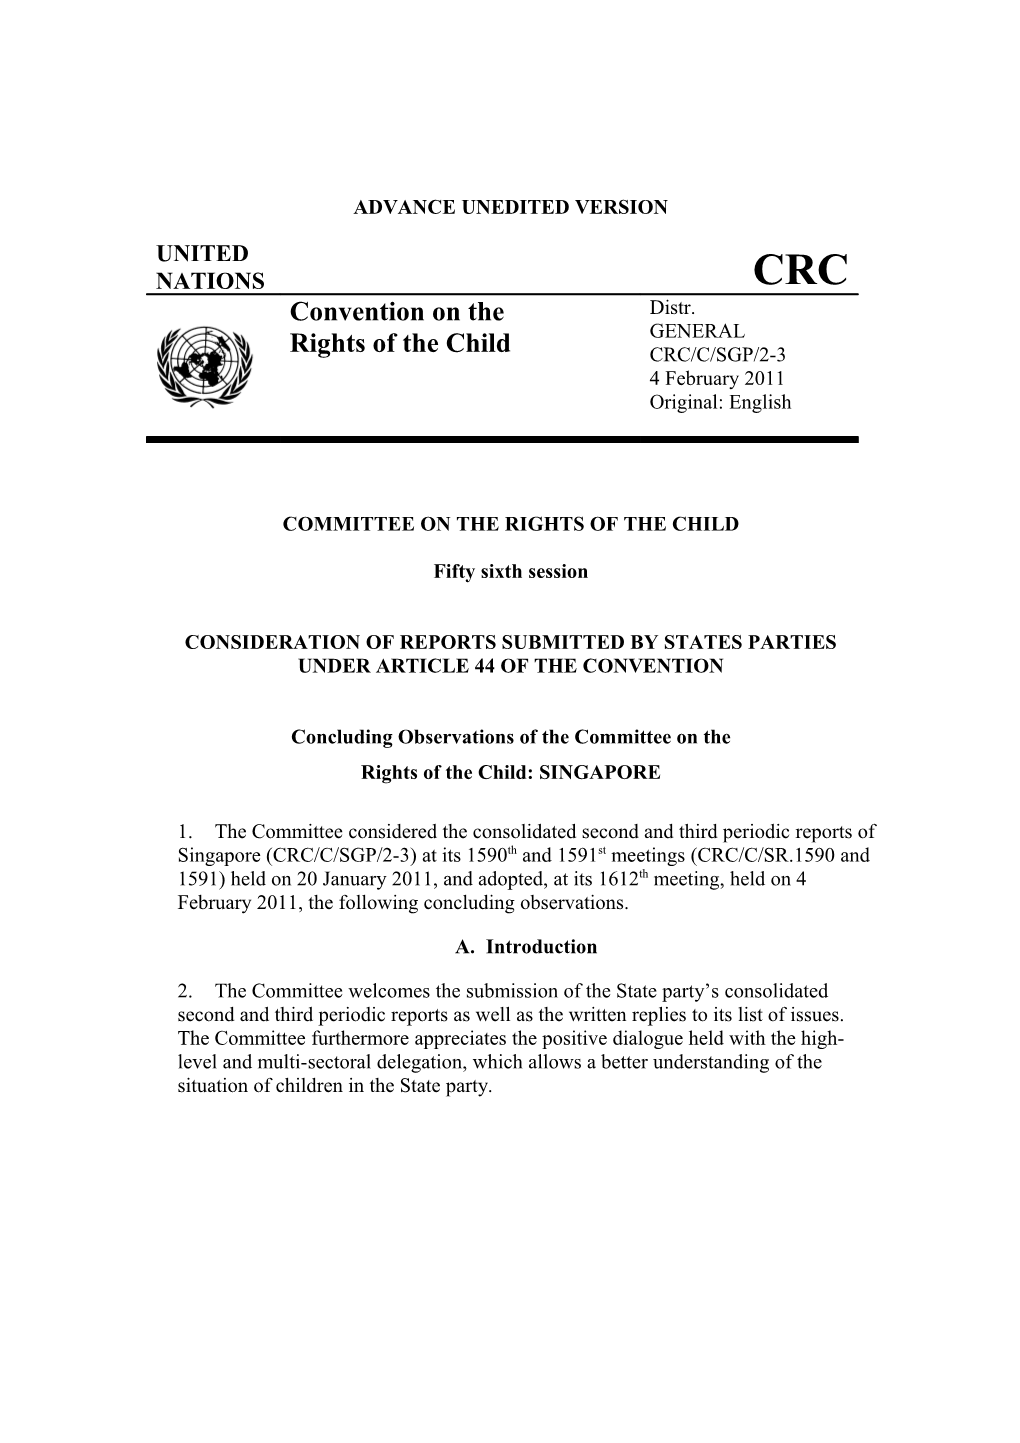 Committee on the Rights of the Child s19